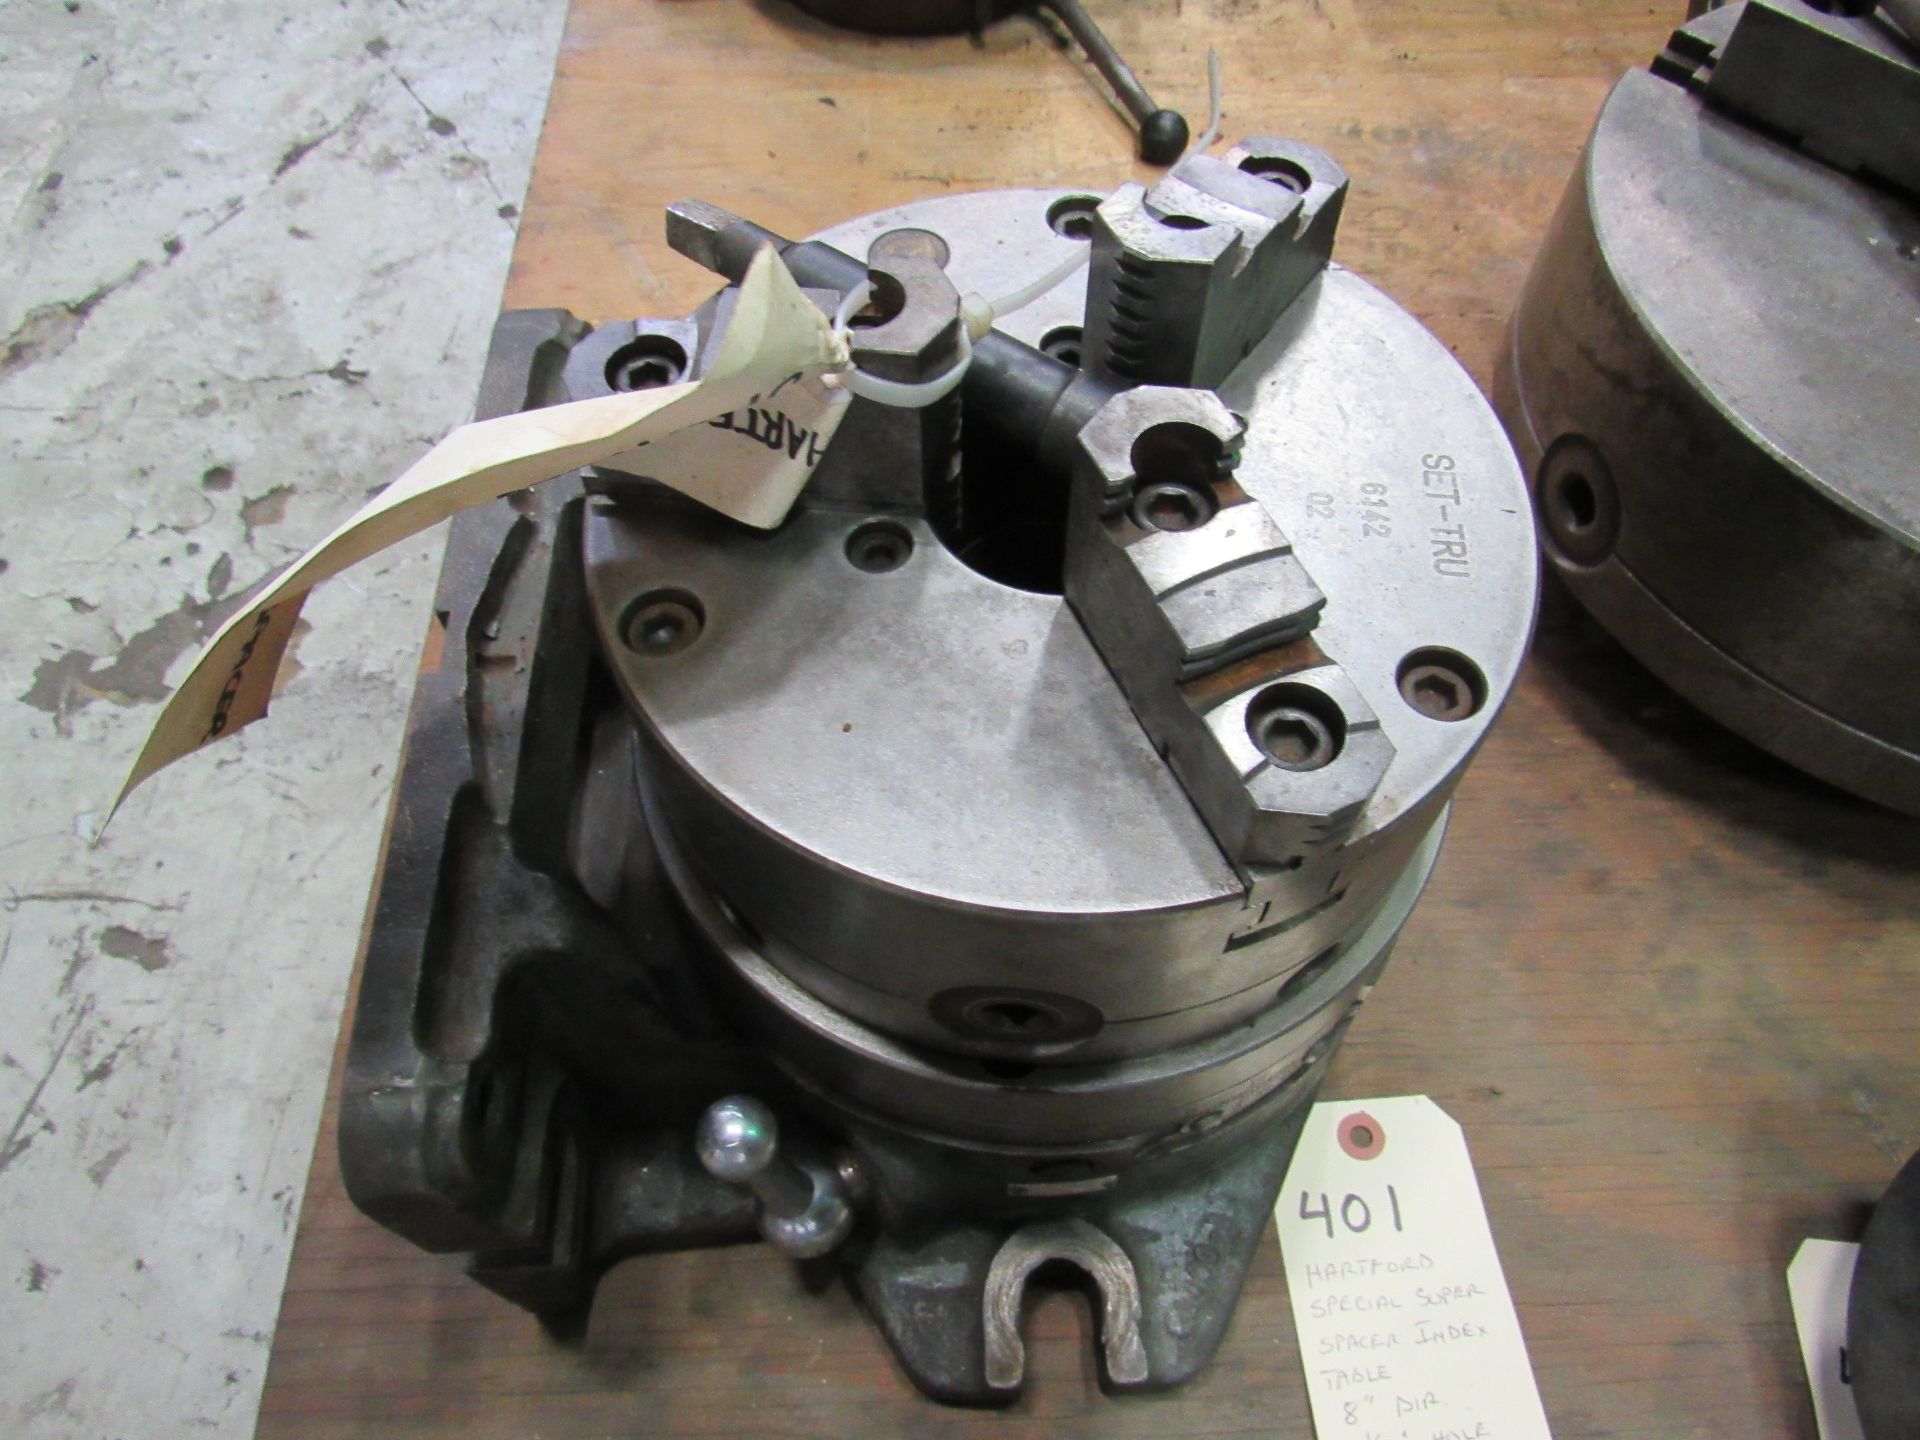 8" 3-Jaw Hartford Special Super Spacer Index Table, 8" dia. 3-jaw chuck, non-cumulative indexing - Image 3 of 5